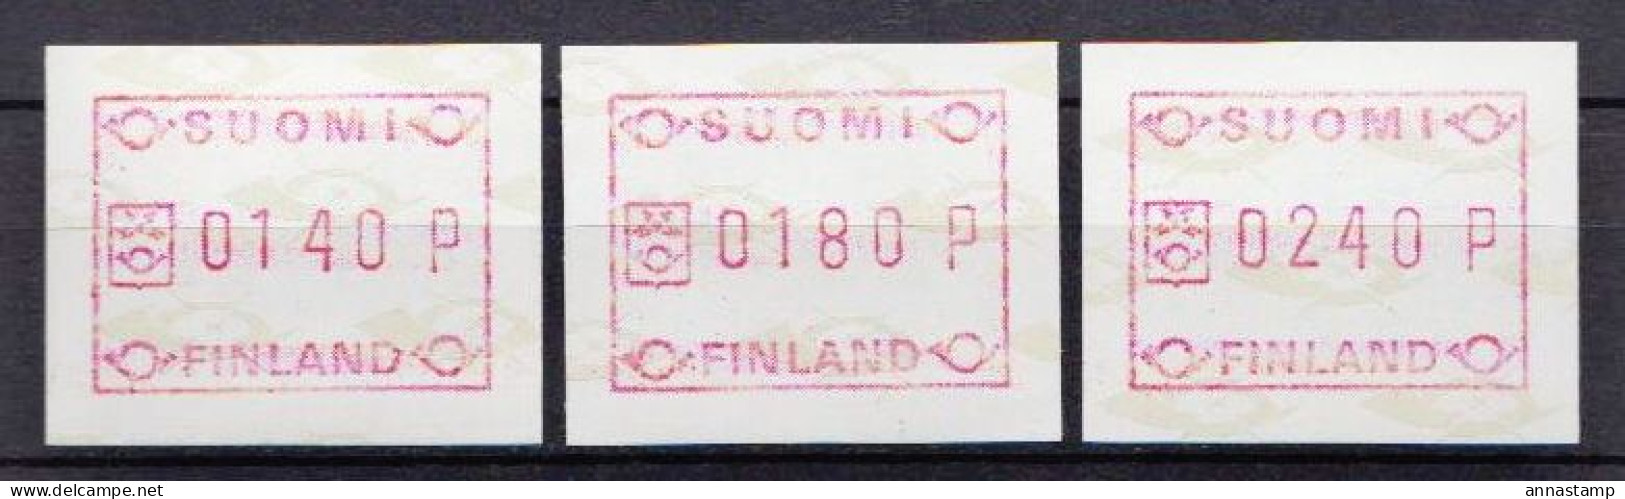 Finland MNH Stamps - Machine Labels [ATM]